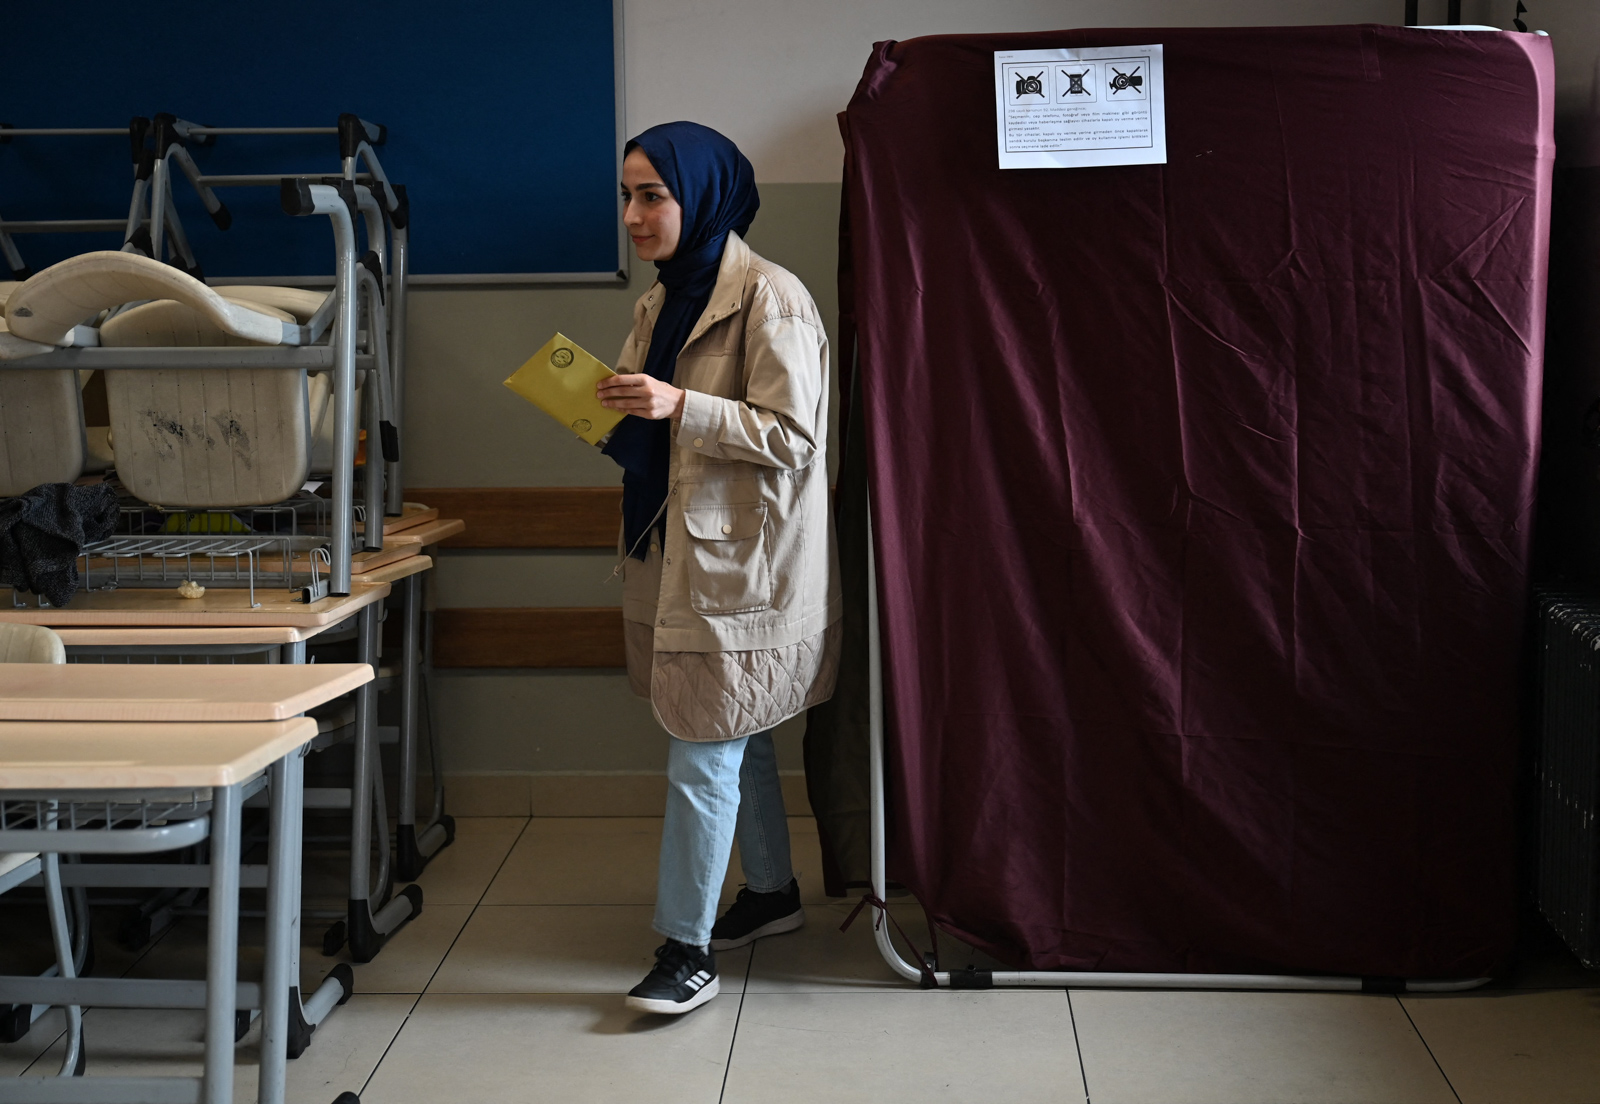 A woman leaves a polling booth at a polling station in Istanbul to vote in the parliamentary and presidental elections in Turkey, on May 14, 2023. Turkey is voting in a momentous election that could extend President Recep Tayyip Erdogan's 21-year grip on power or put the mostly Muslim nation on a more secular course. (Photo by OZAN KOSE / AFP) (Photo by OZAN KOSE/AFP via Getty Images)